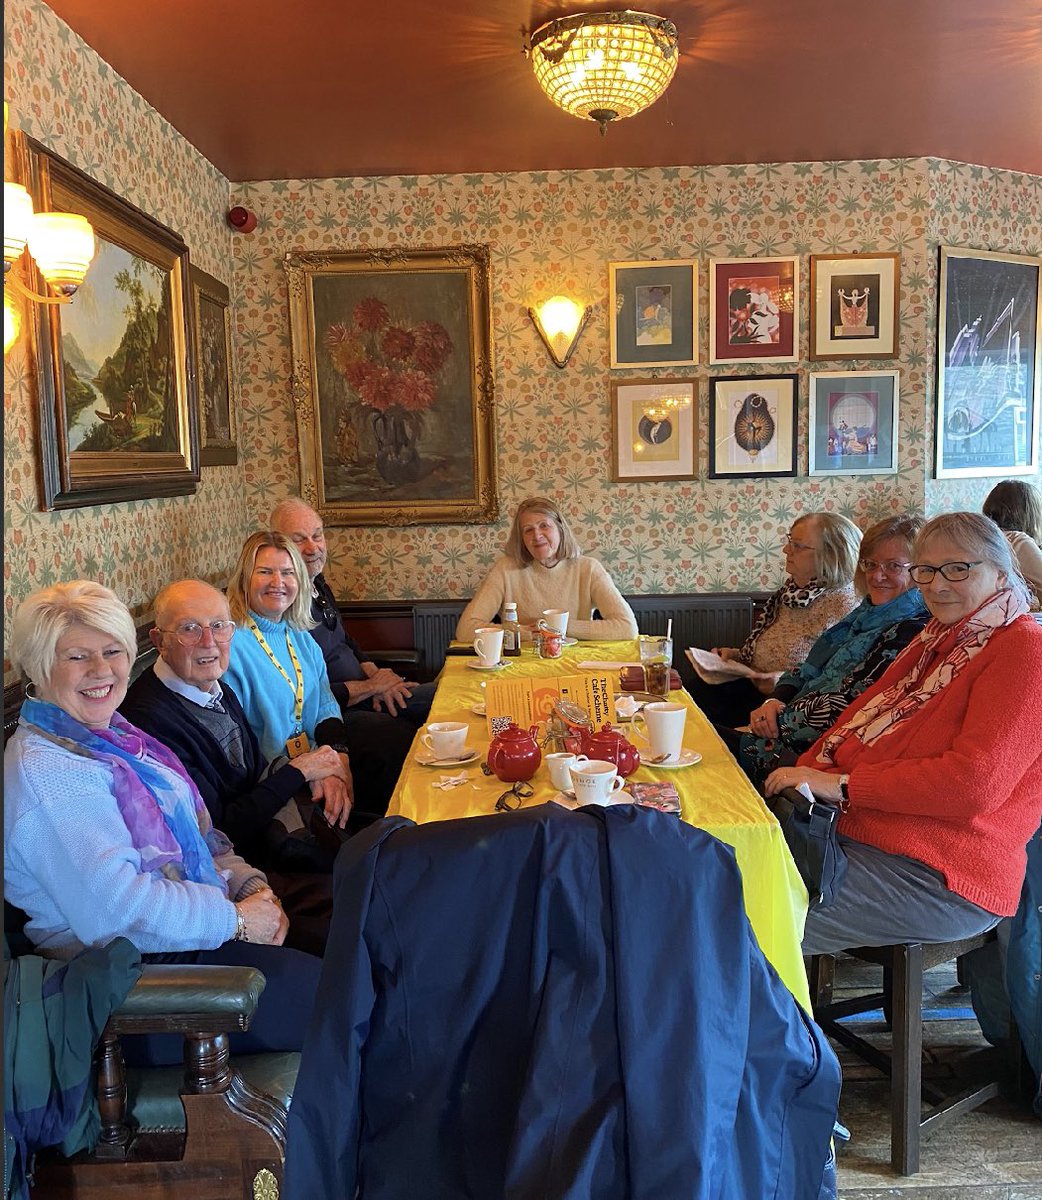 Who is ready for a new week of Chatty Cafe chats and opportunities!? We believe a chat can improve your day 💛 Thank you to our registered venue for sharing this picture! #SpreadingLoveAndConnection #NoOneShouldFeelAlone #CommunityChatTable #PubVenue #ChattyCafe